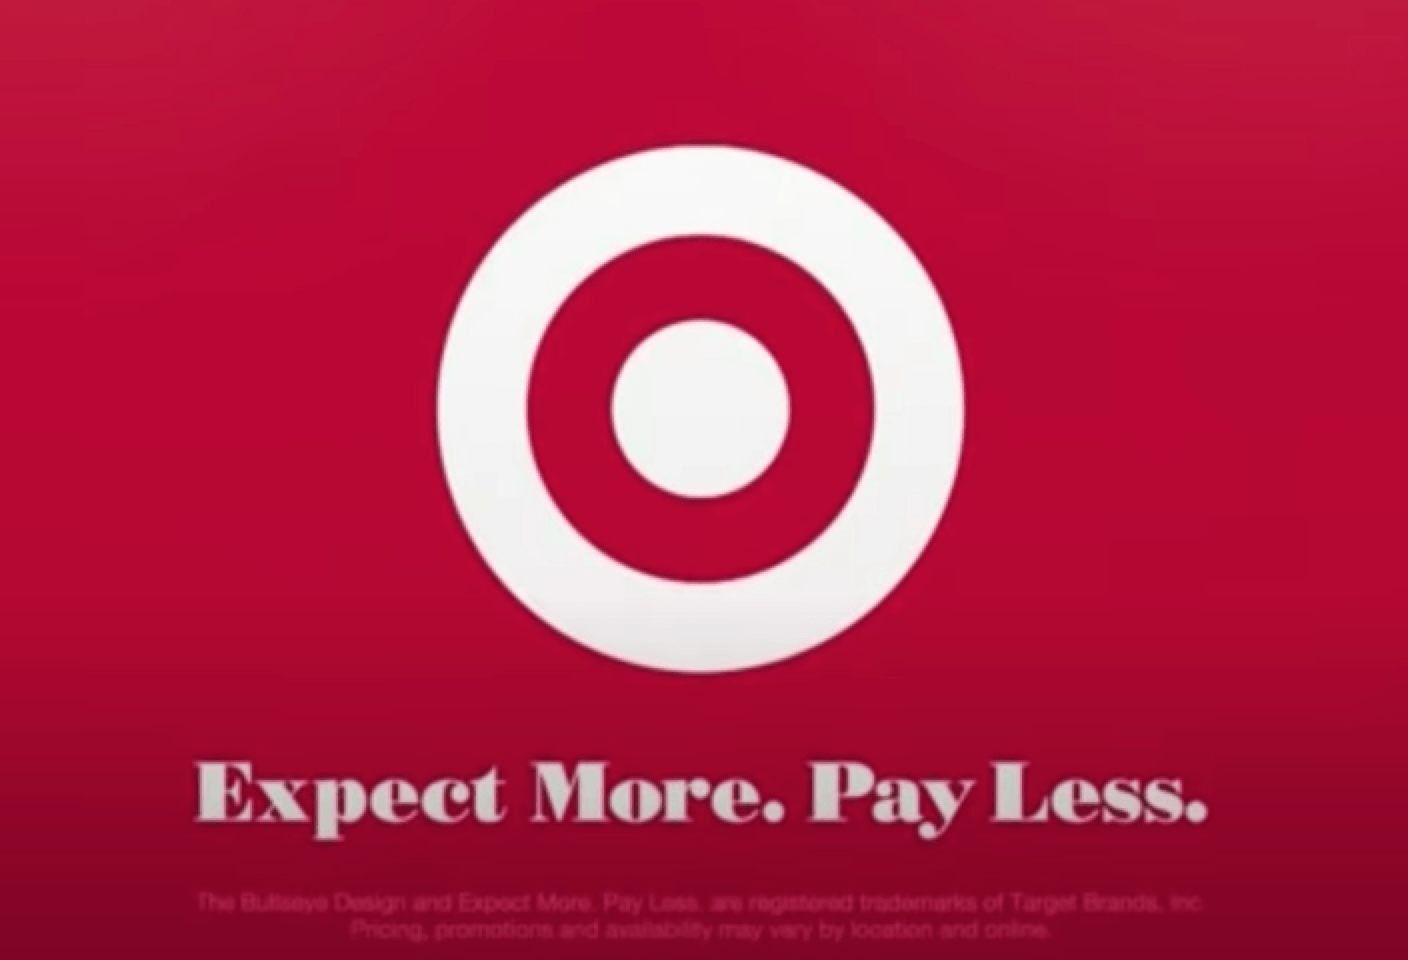 cassandra macdonald recommends target expect more pay less pic